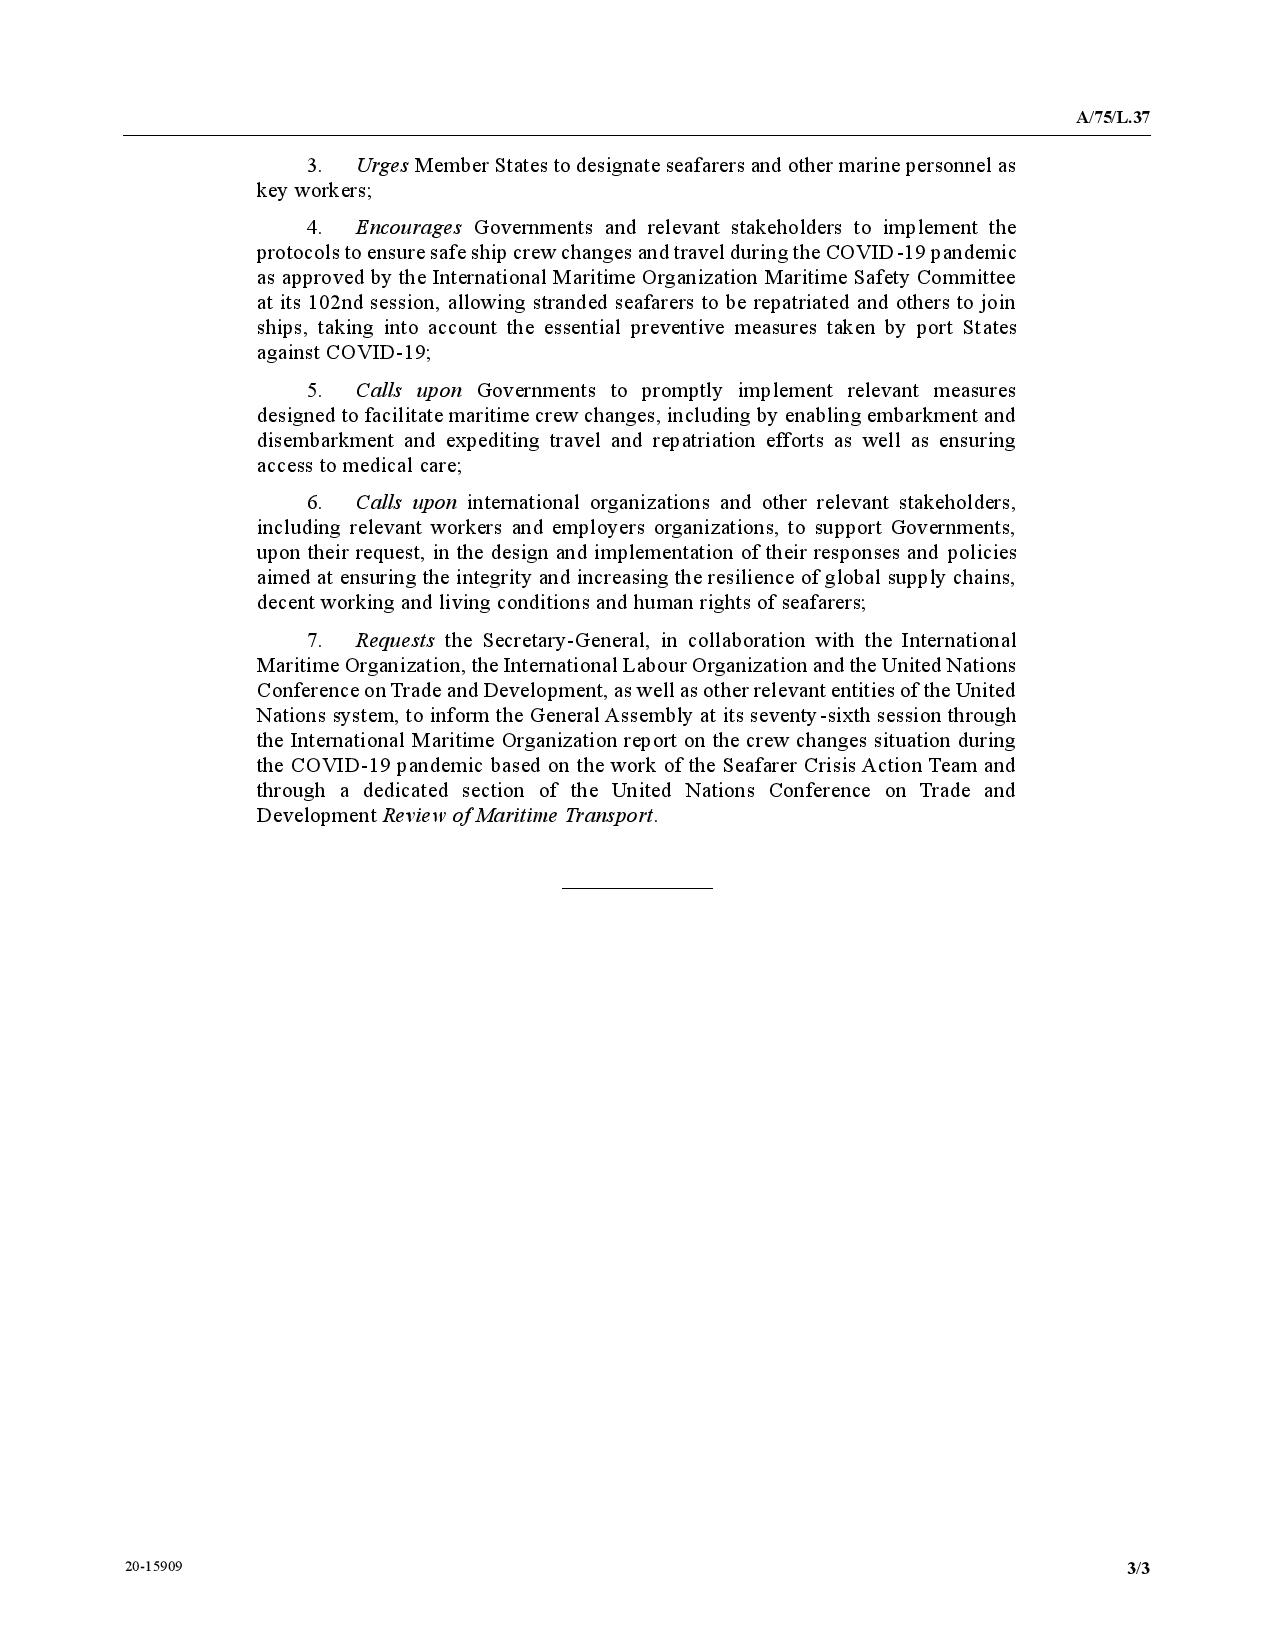 UN RESOLUTION ON SEAFARERS page 002